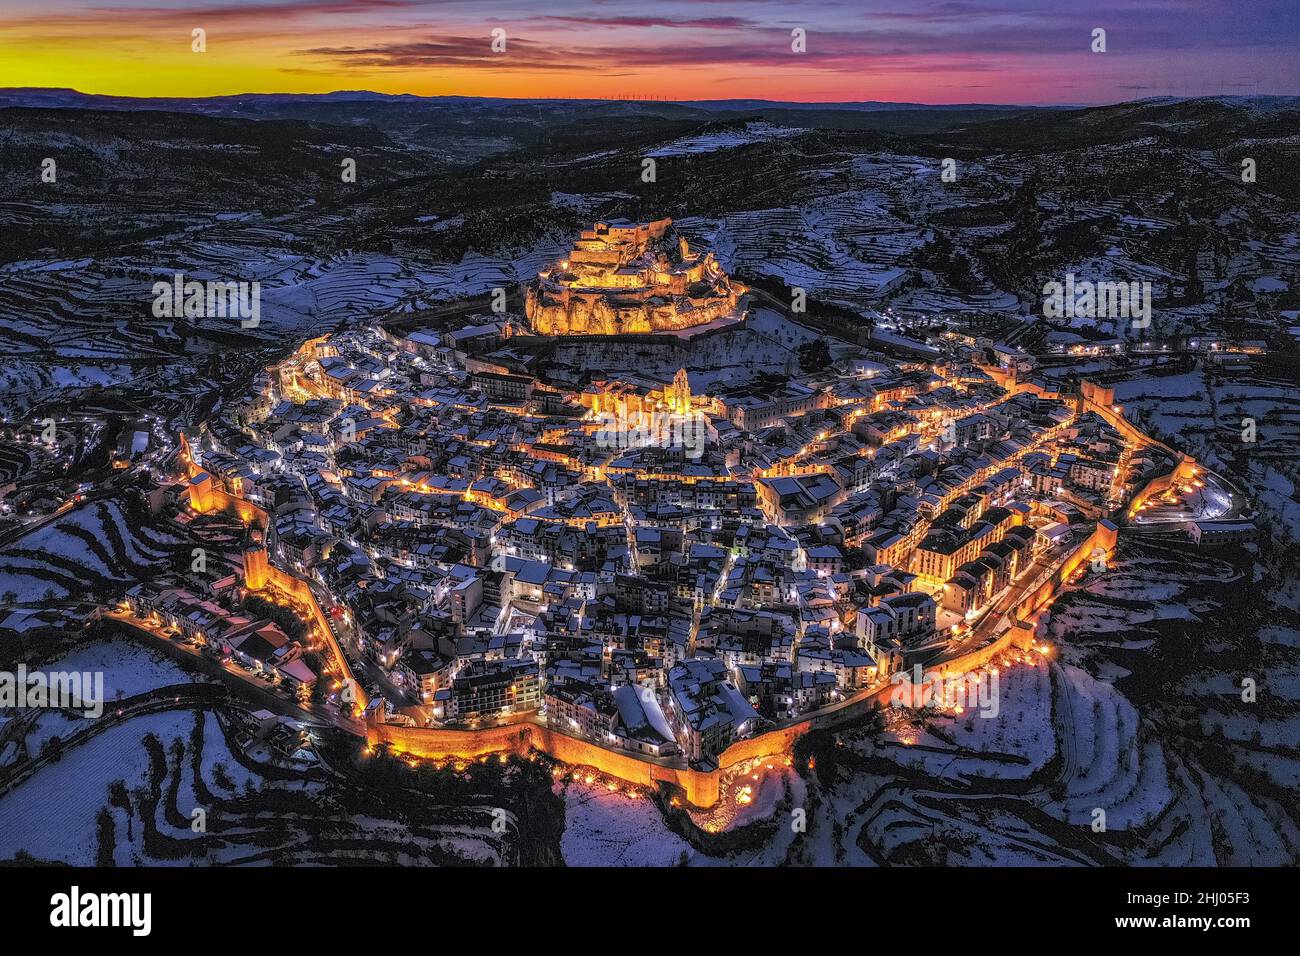 Morella medieval city aerial view, in a winter twilight - blue hour, after a snowfall (Castellón province, Valencian Community, Spain) Stock Photo